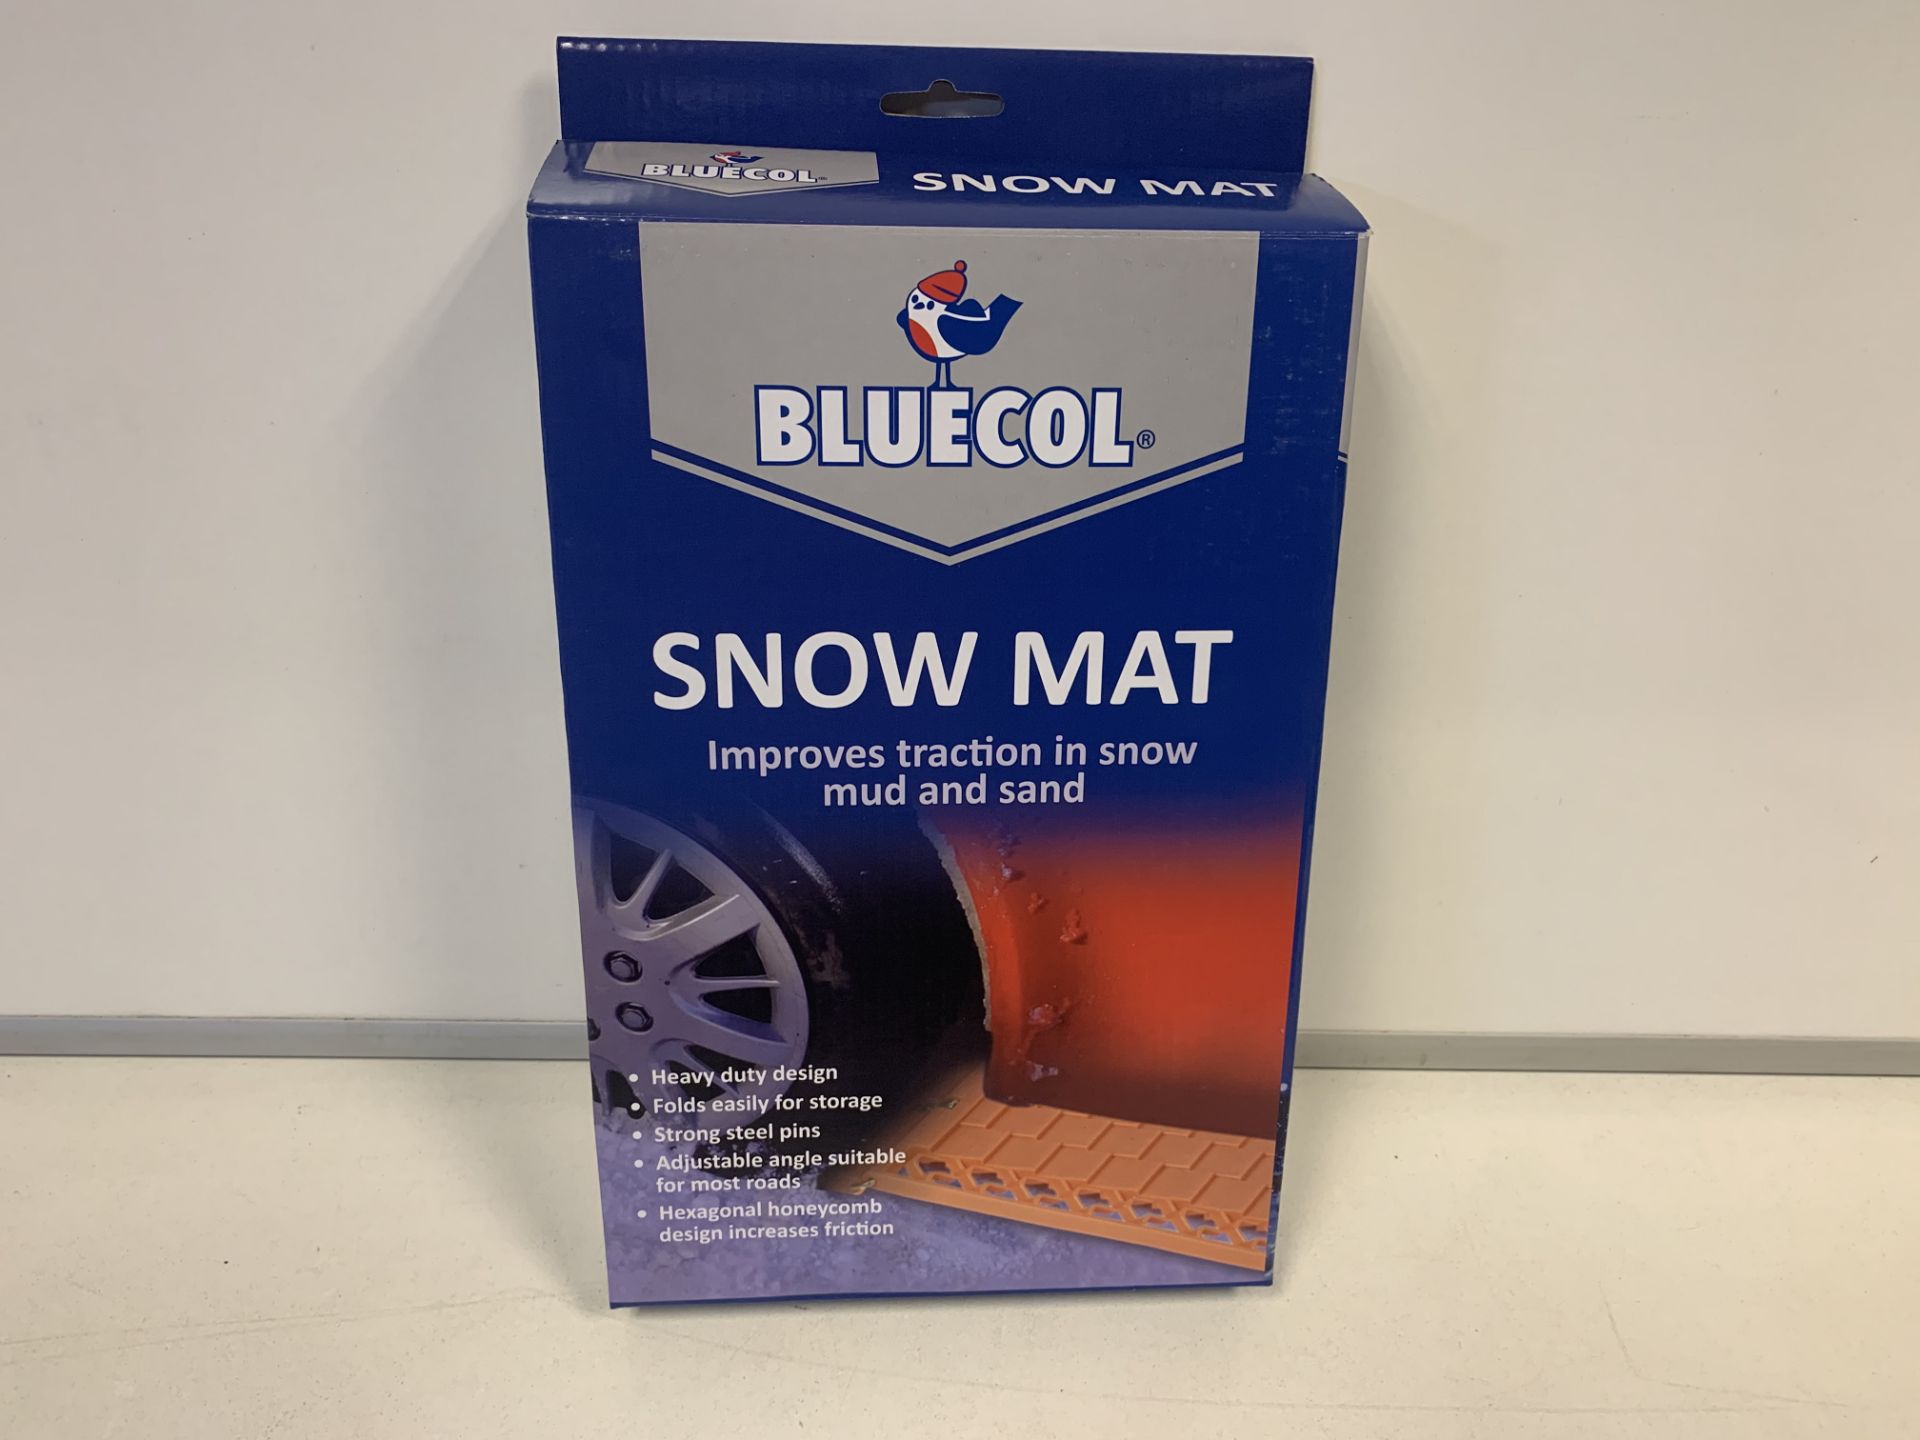 20 x NEW BLUECOL SNOW MAT - IMPROVES TRACTION IN SNOW, MUD & SAND. RRP £15 EACH